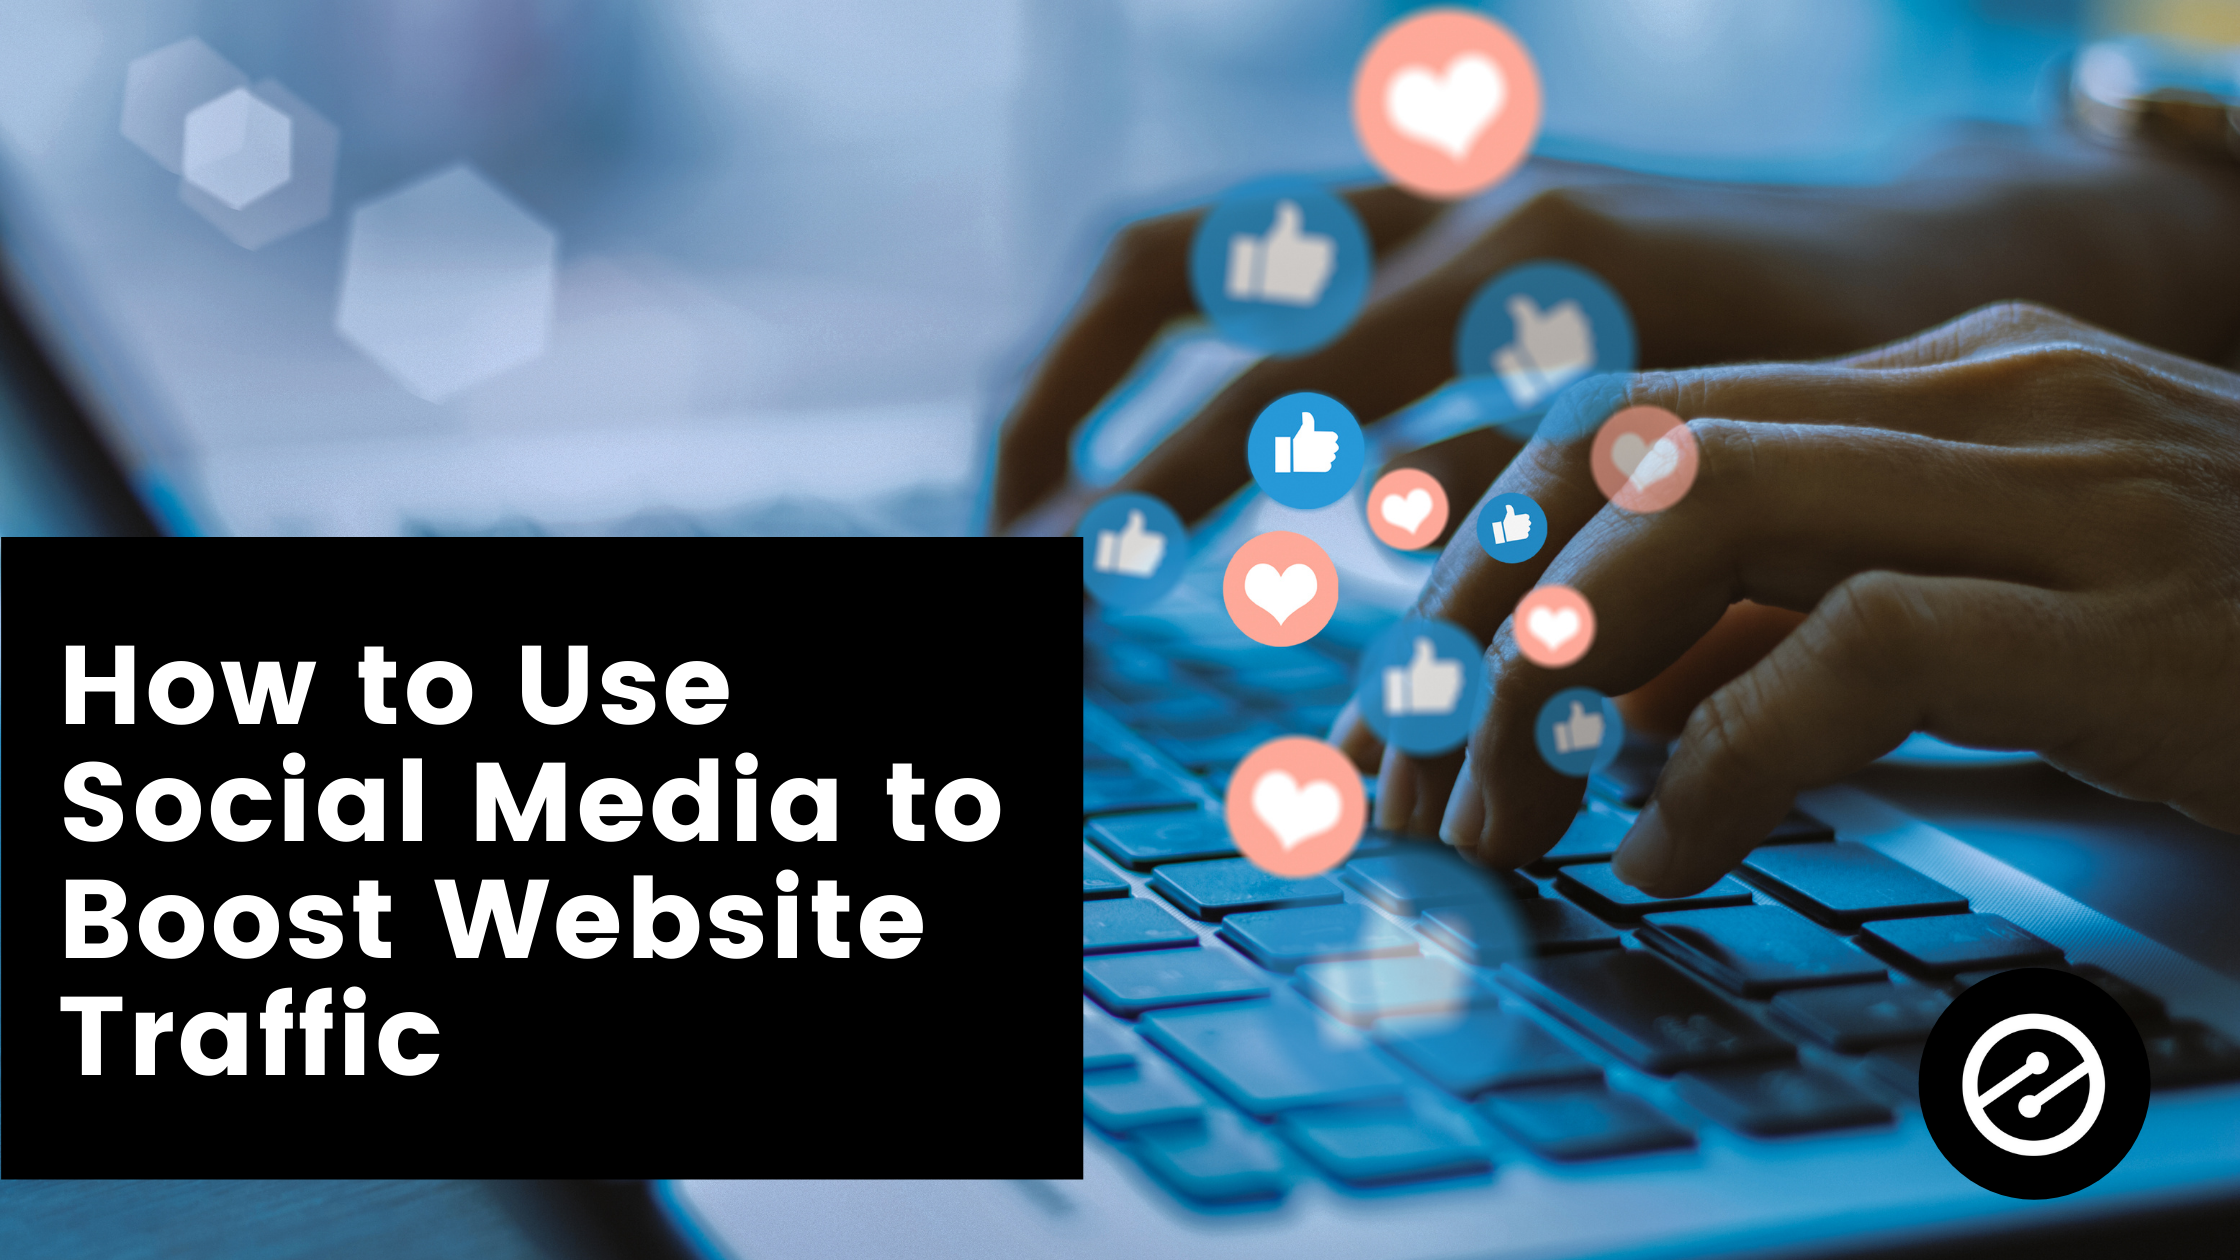 How to Use Social Media to Boost Website Traffic